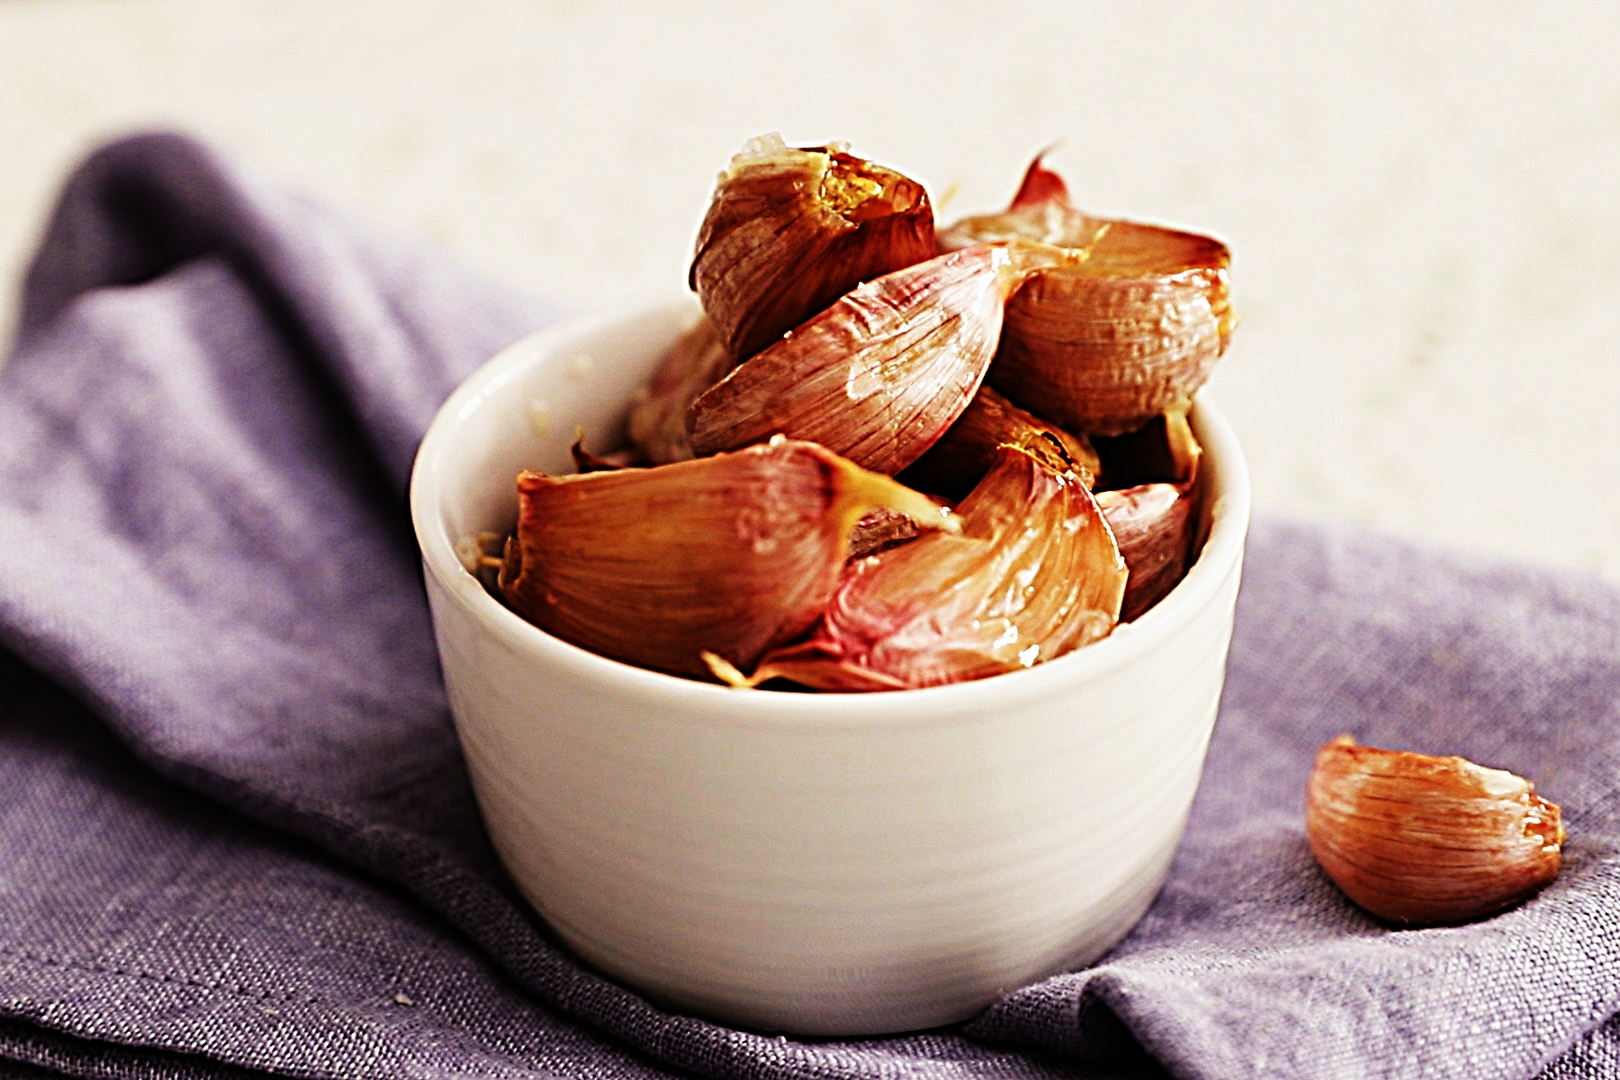 Stupid-Easy Recipe for Roasted Garlic Cloves (#1 Top-Rated)